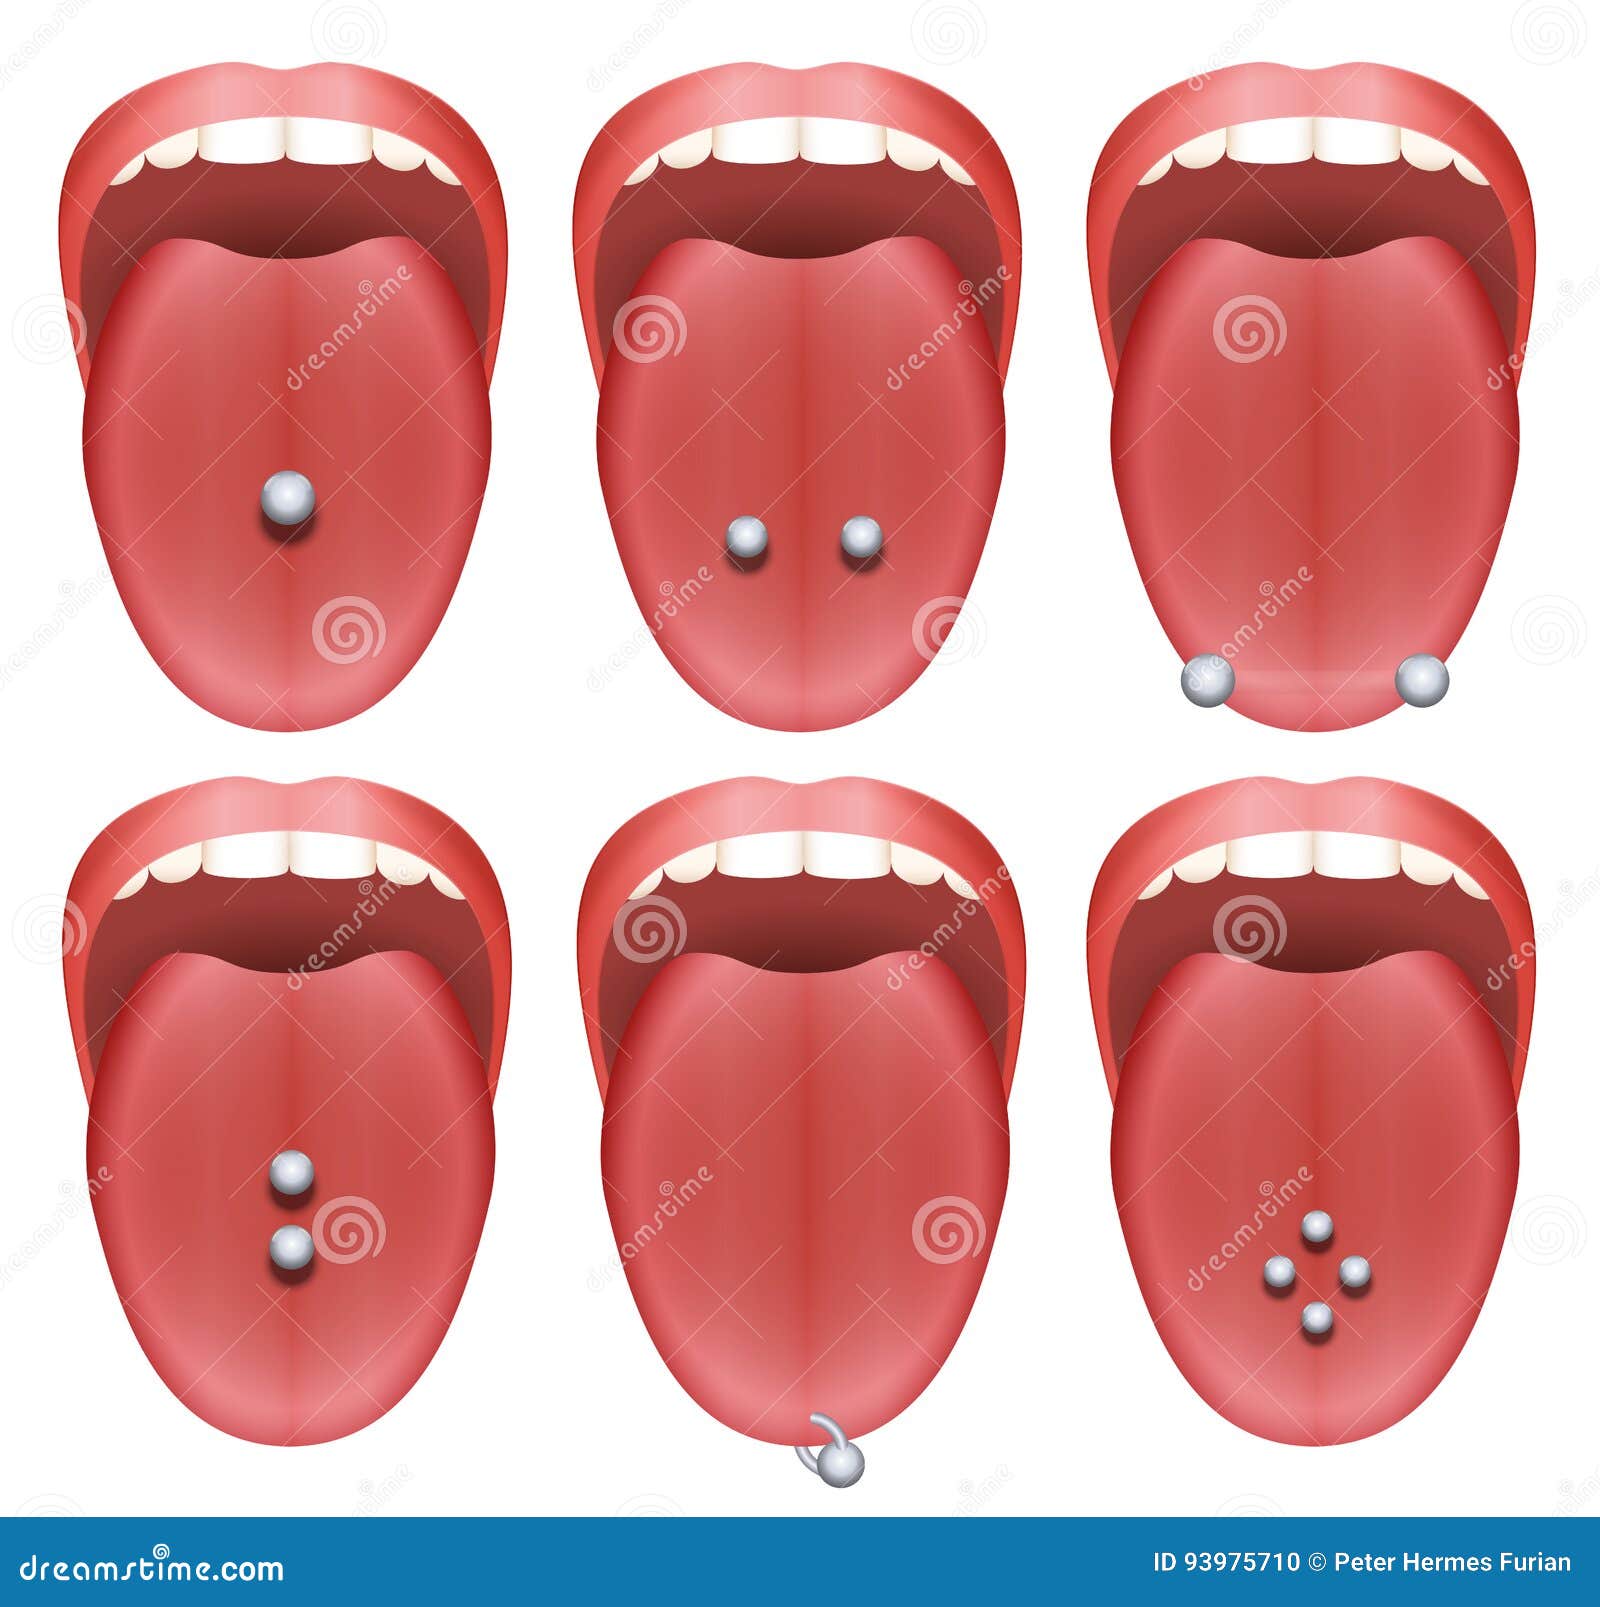 tongue piercing examples